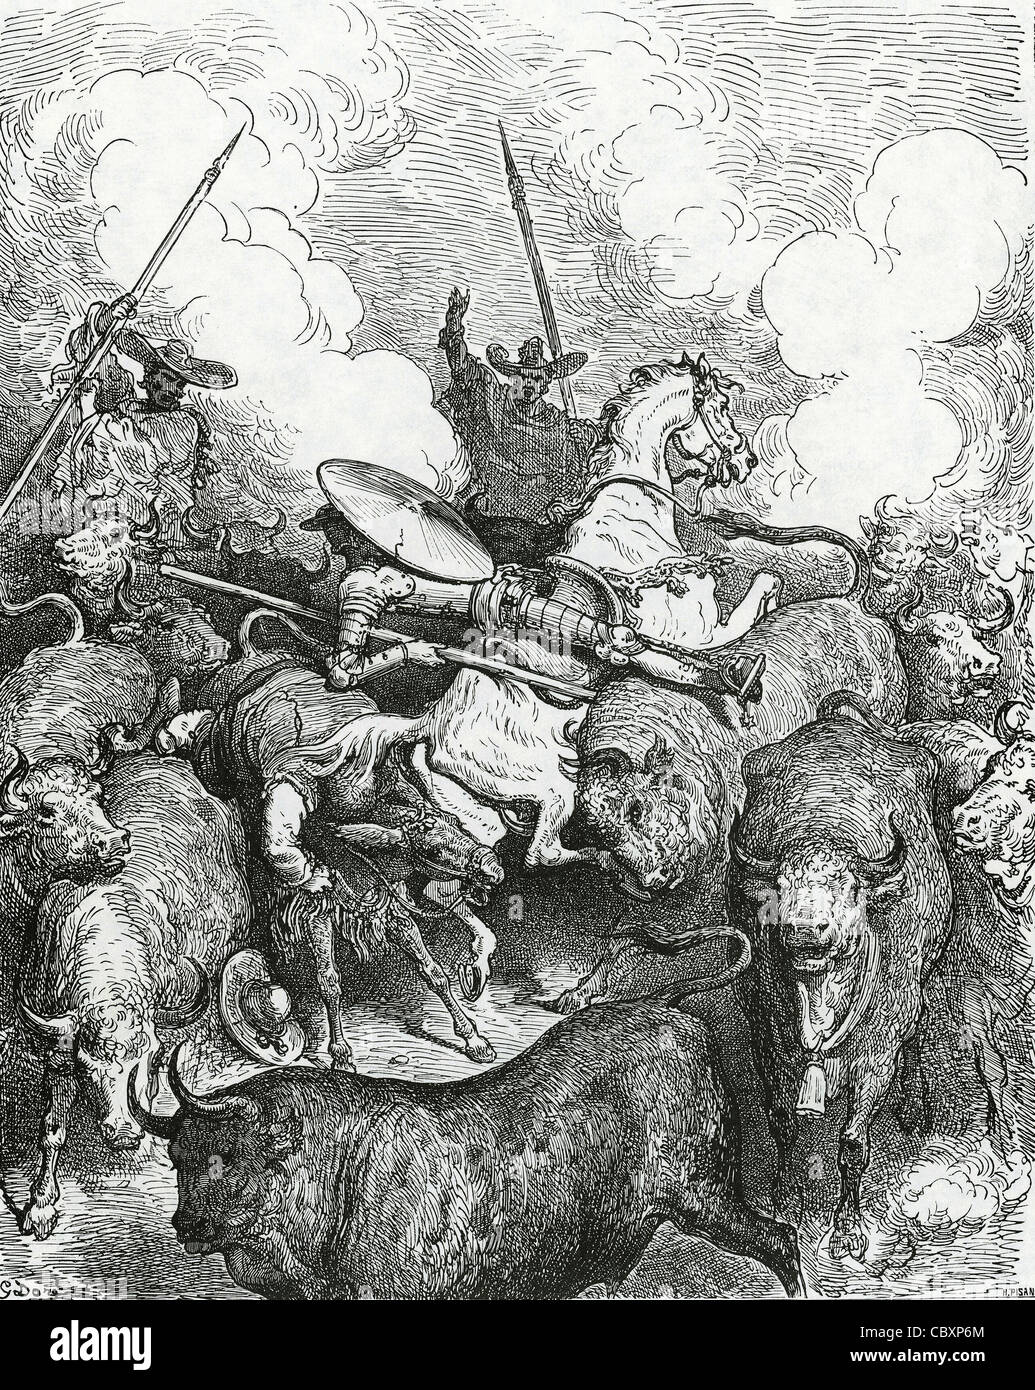 Don Quixote by Miguel de Cervantes. Don Quixote and Sancho in front of the bulls. Engraving by Gustave Dore. 19th century. Stock Photo